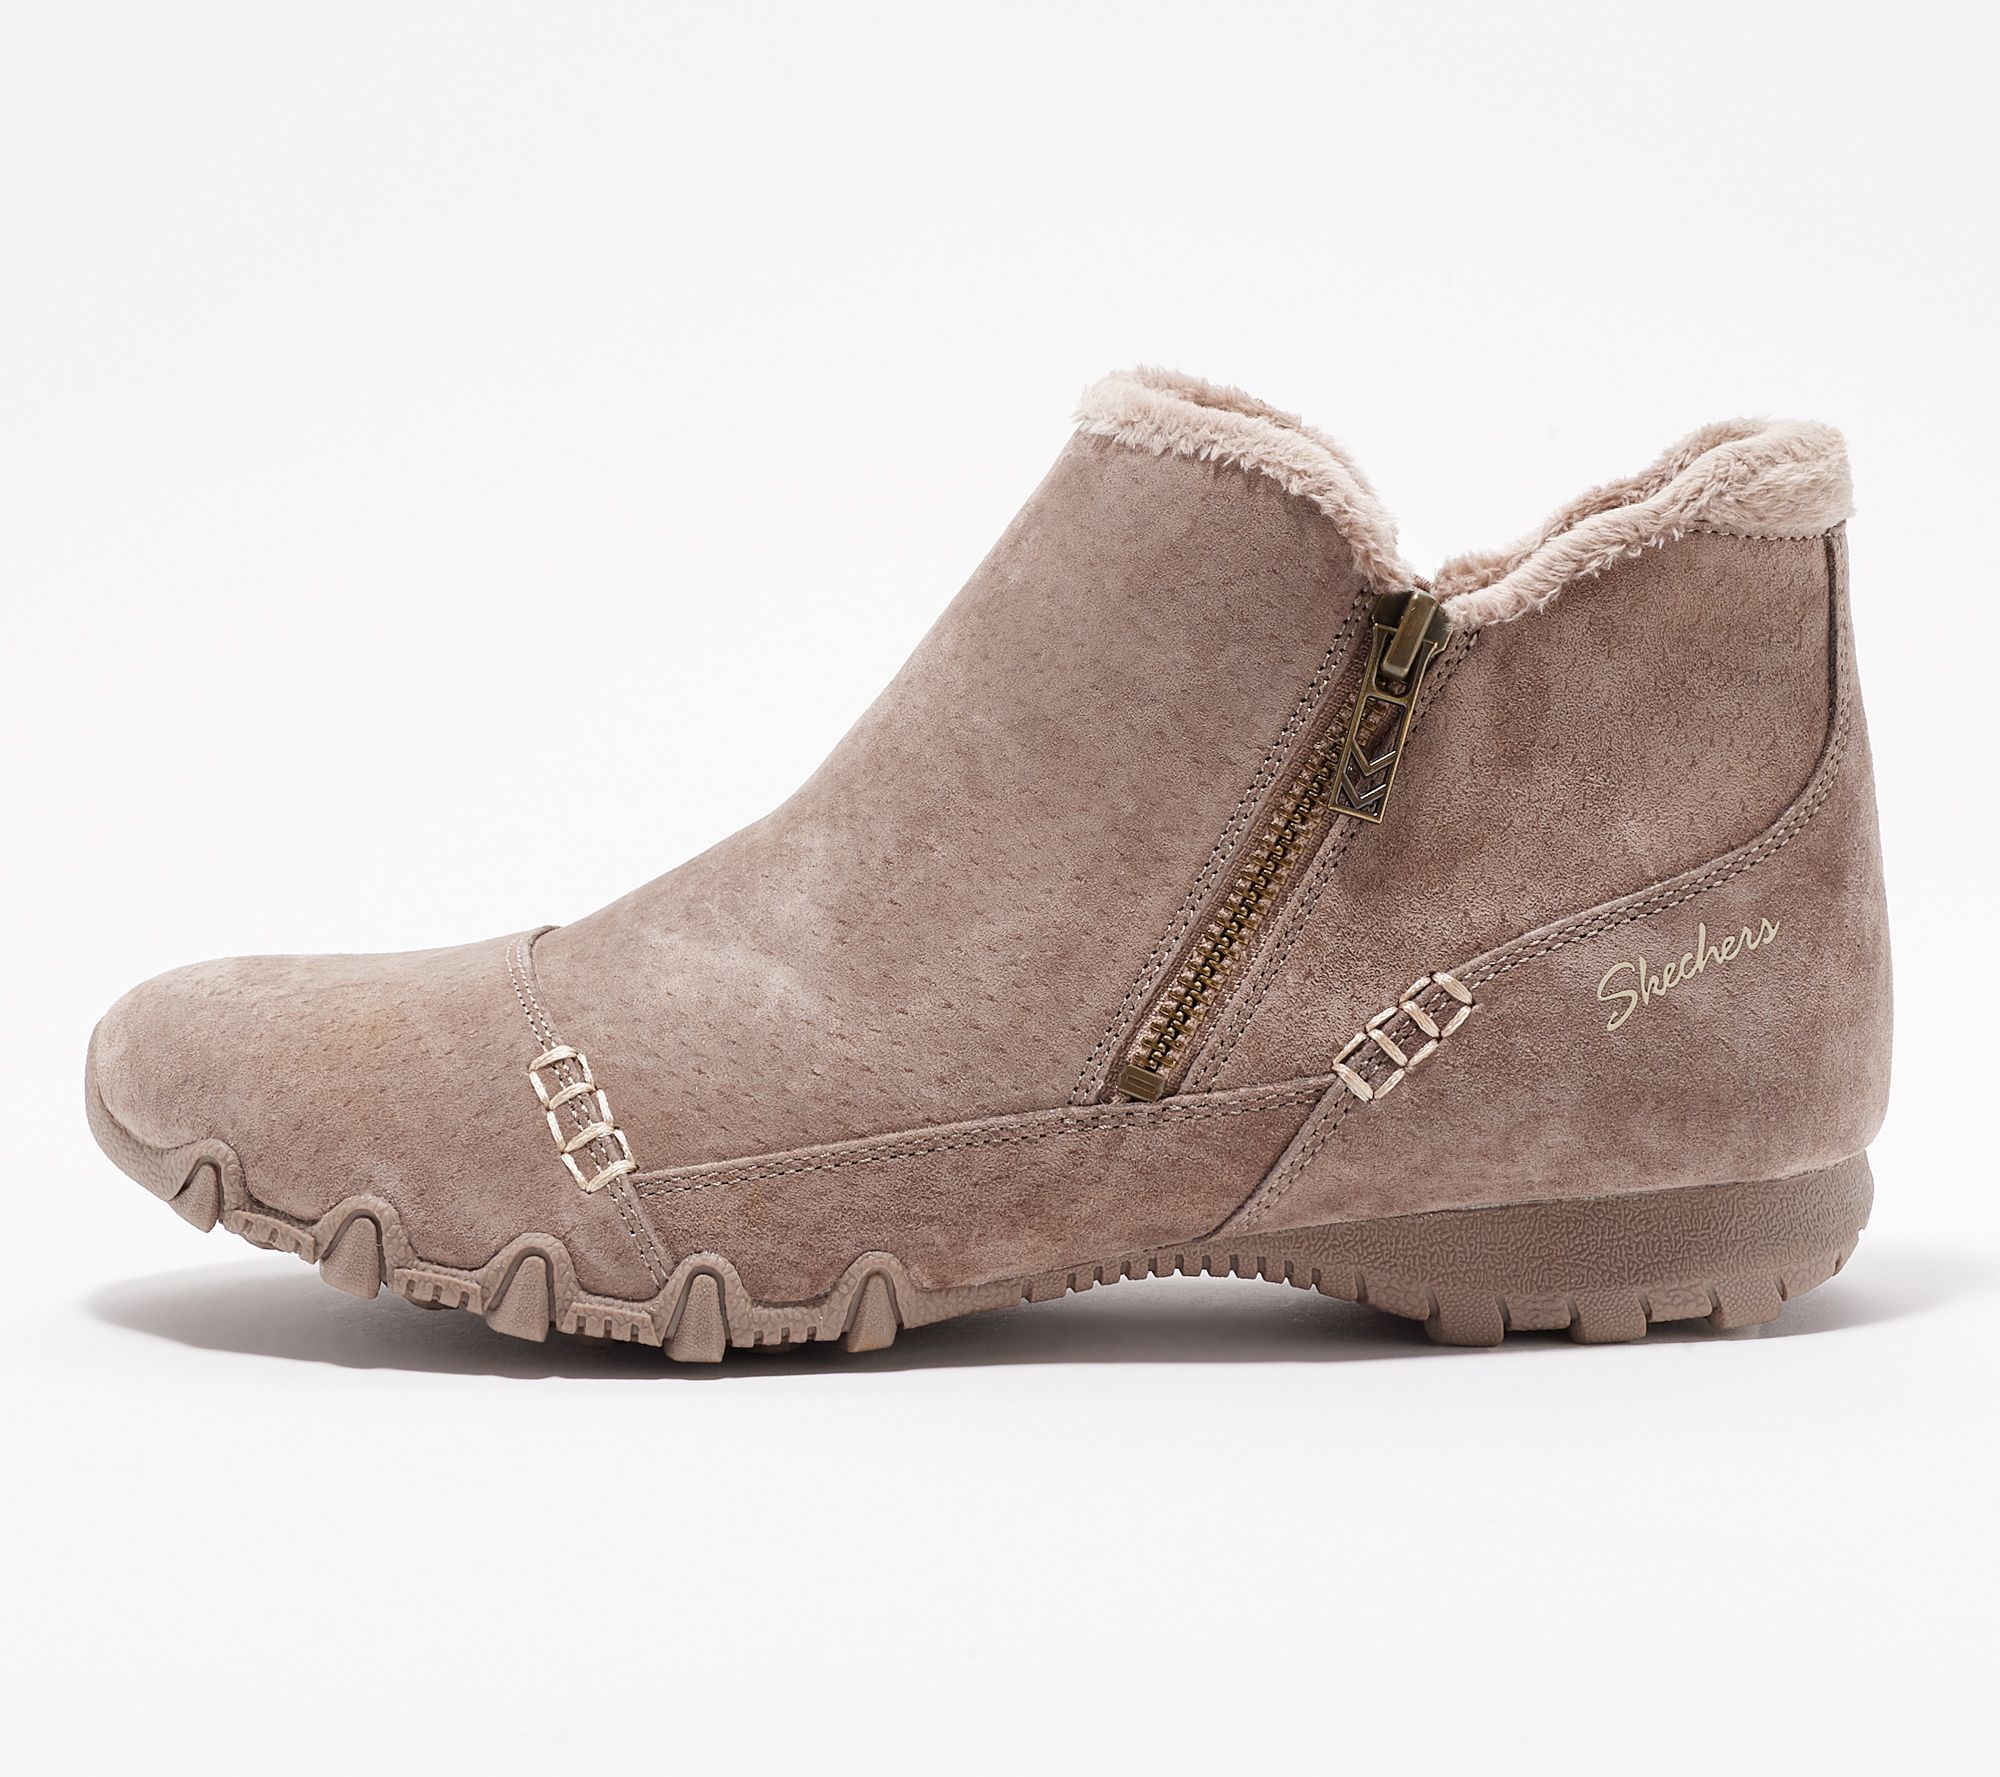 skechers leather ankle boots